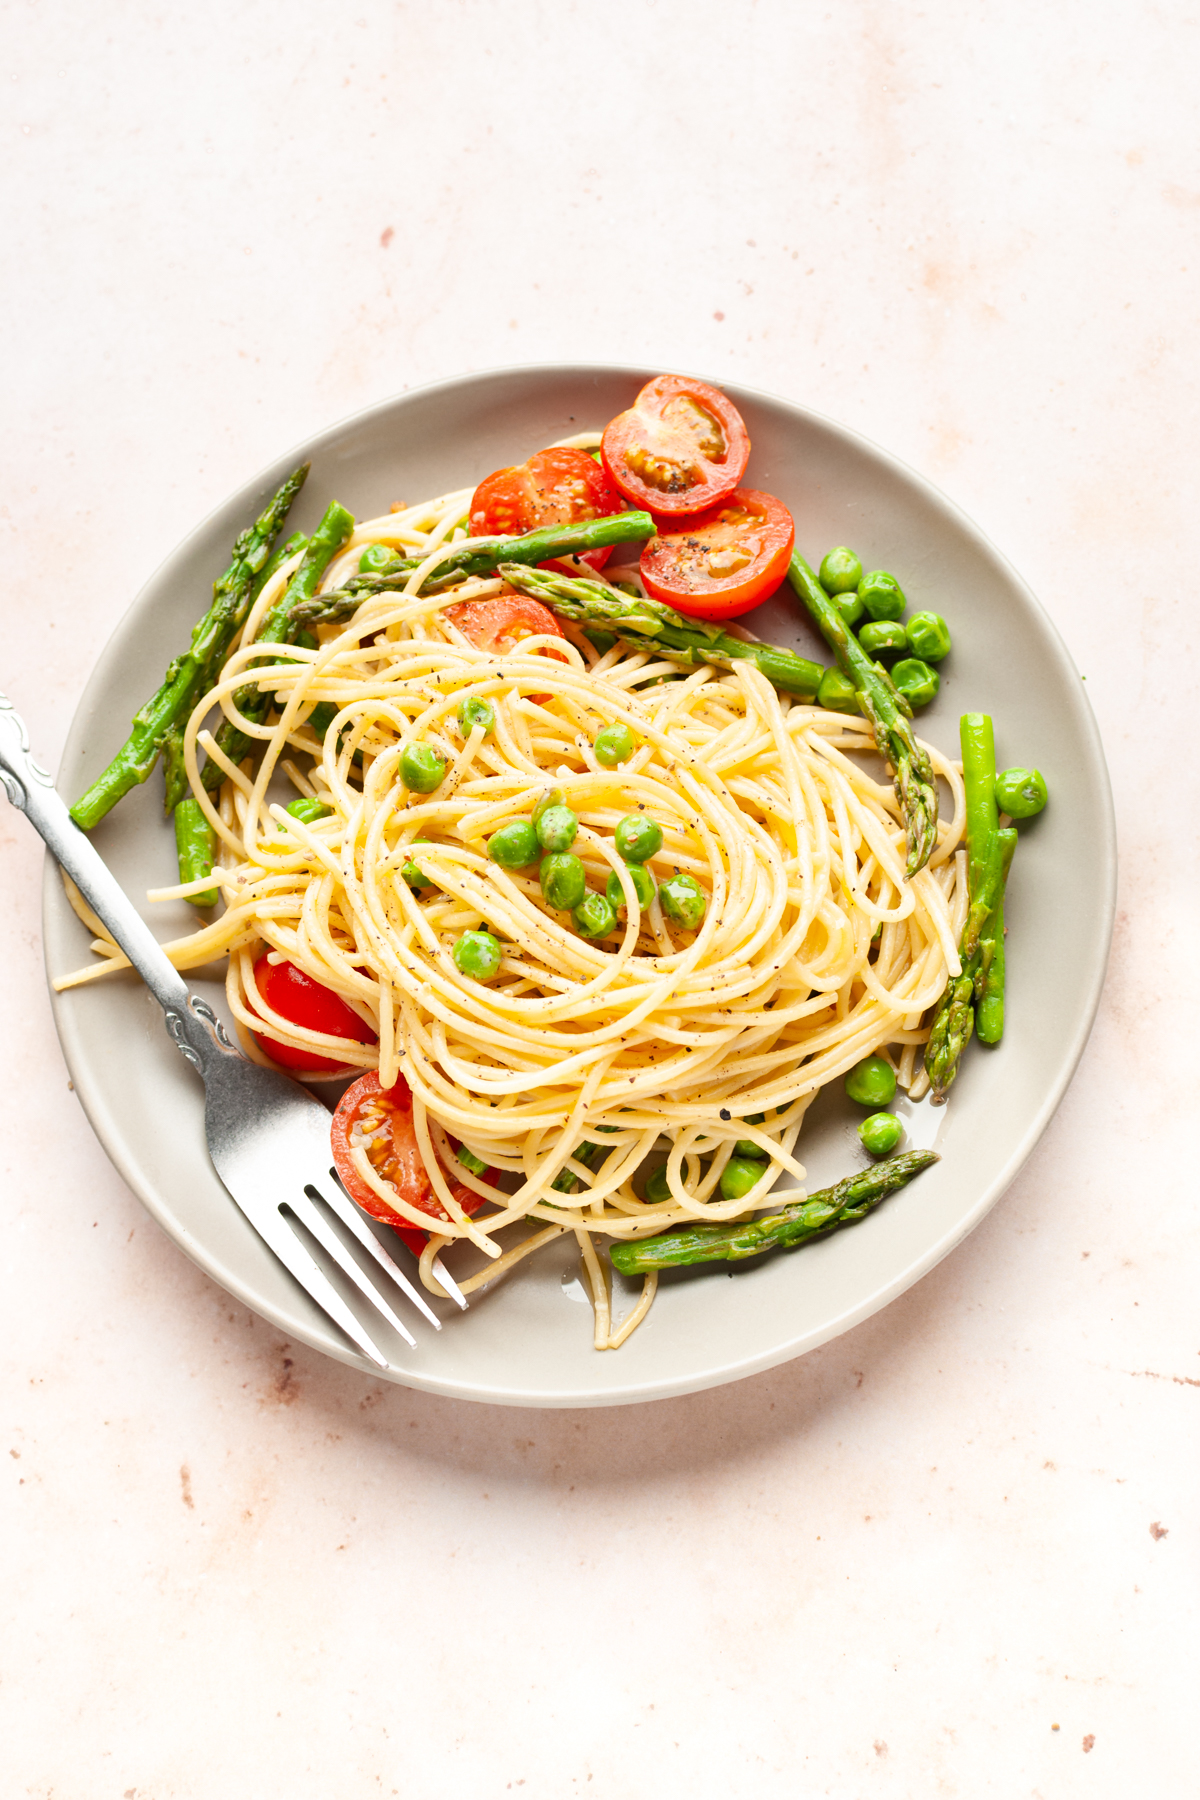 pasta primavera with asparagus, peas, and cherry tomatoes in a plate with fork.